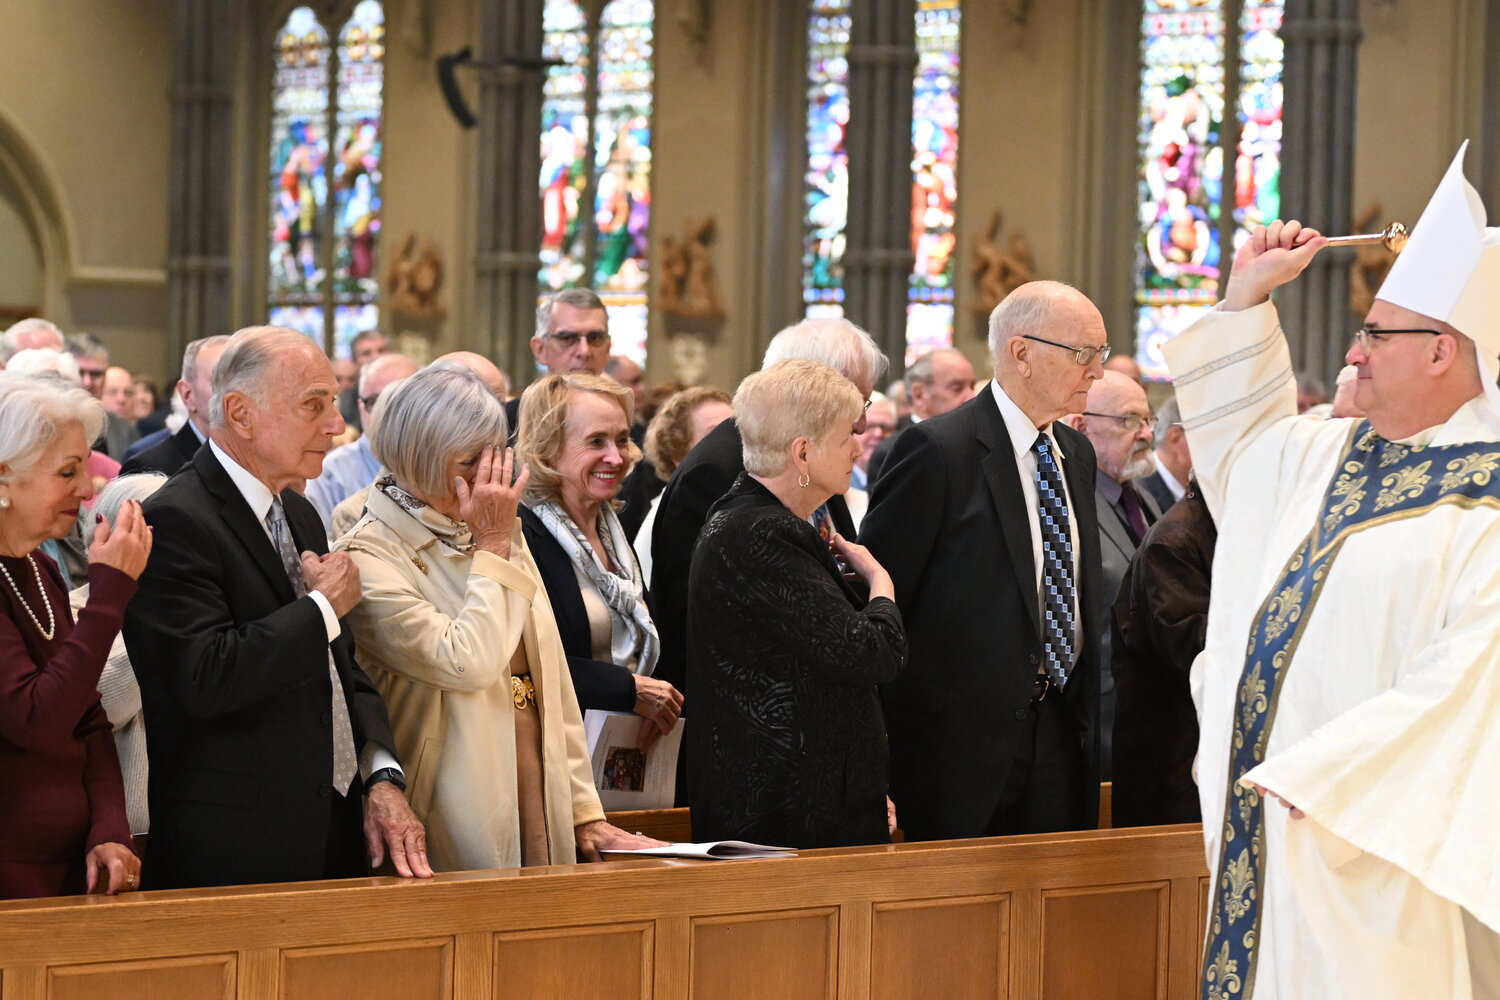 Bishop Richard G. Henning celebrated Mass for 184 couples celebrating milestone anniversaries at the Cathedral of SS. Peter and Paul on October 22. The couples renewed their matrimonial vows and received a blessing from the bishop.